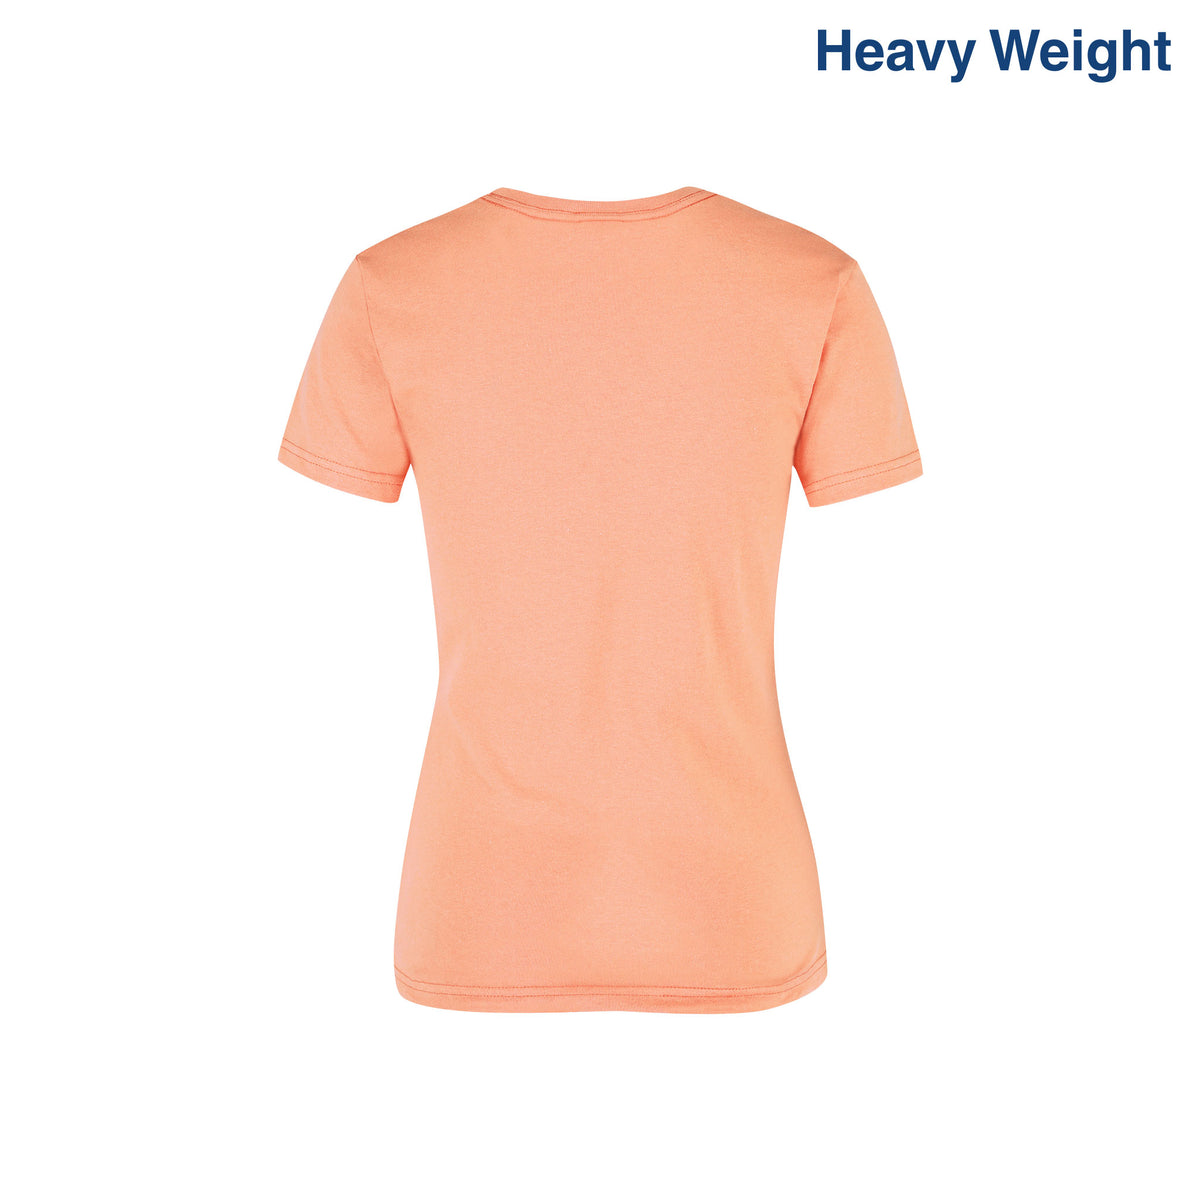 Women’s Heavy Weight Crew Neck Short Sleeve Silhouette T-Shirt (Coral ...